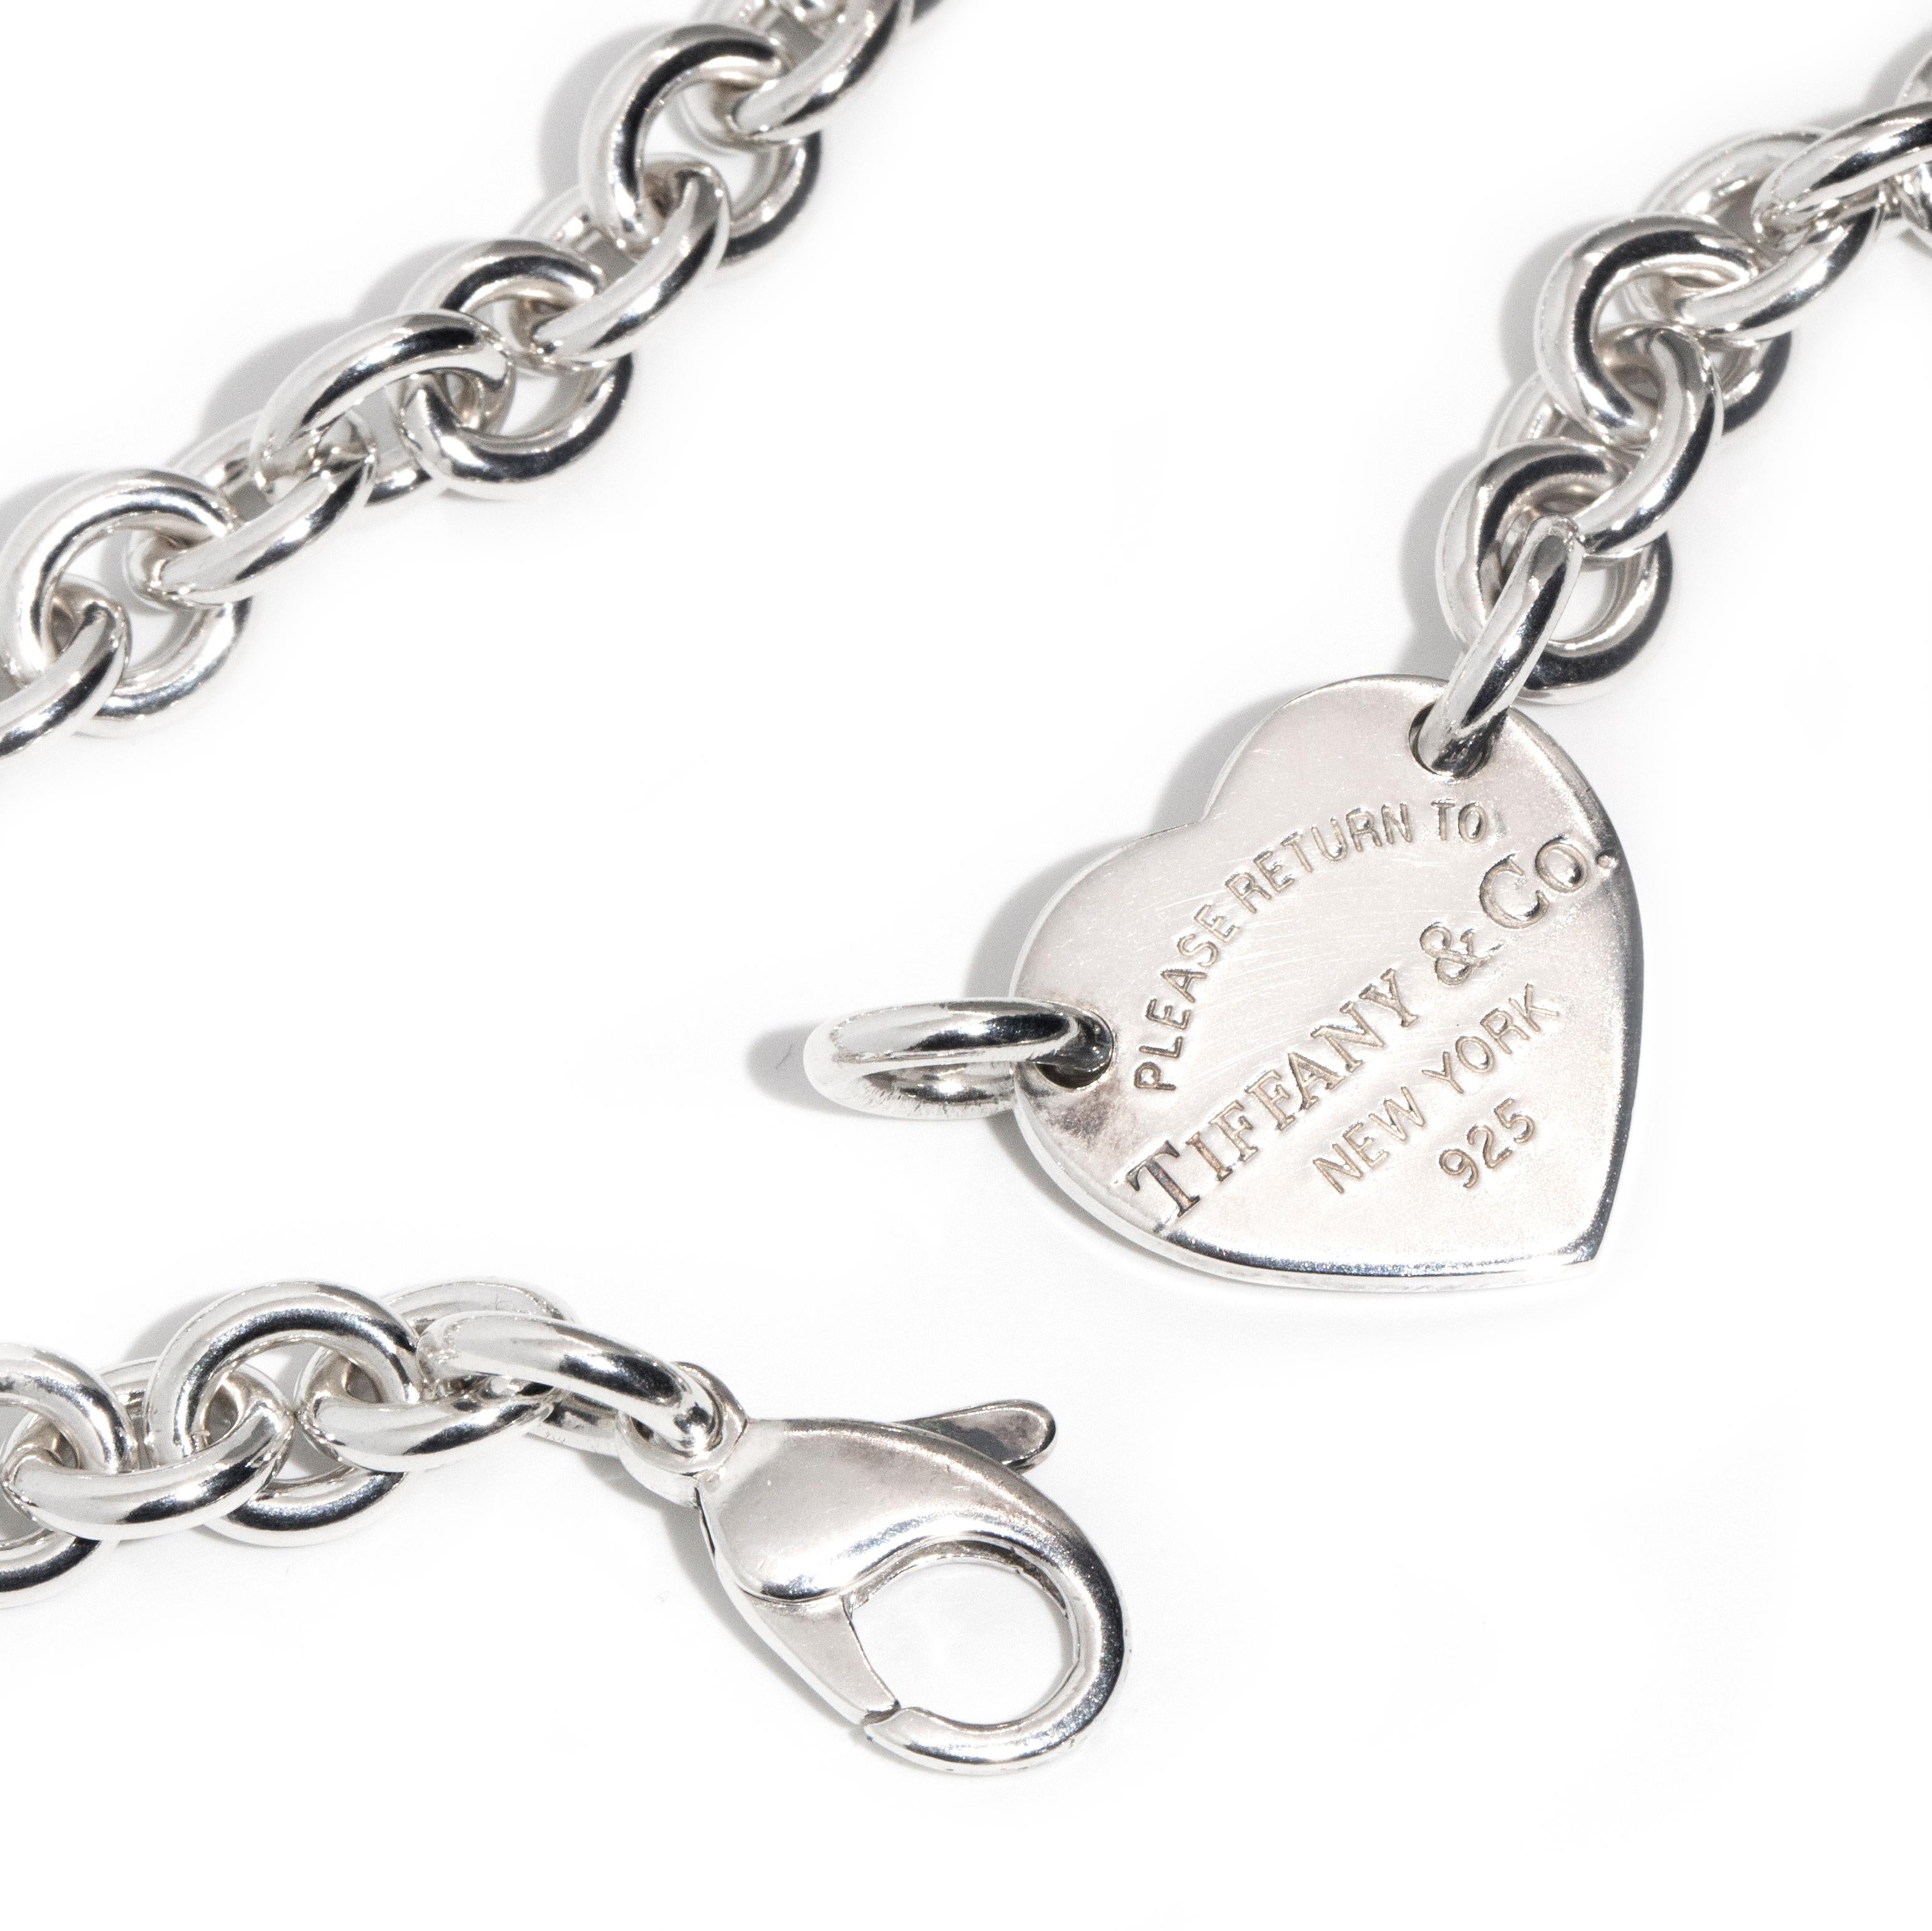 Tiffany & Co. Sterling Silver Chain Link Necklace & Hallmarked Heart Tag Pendant 2